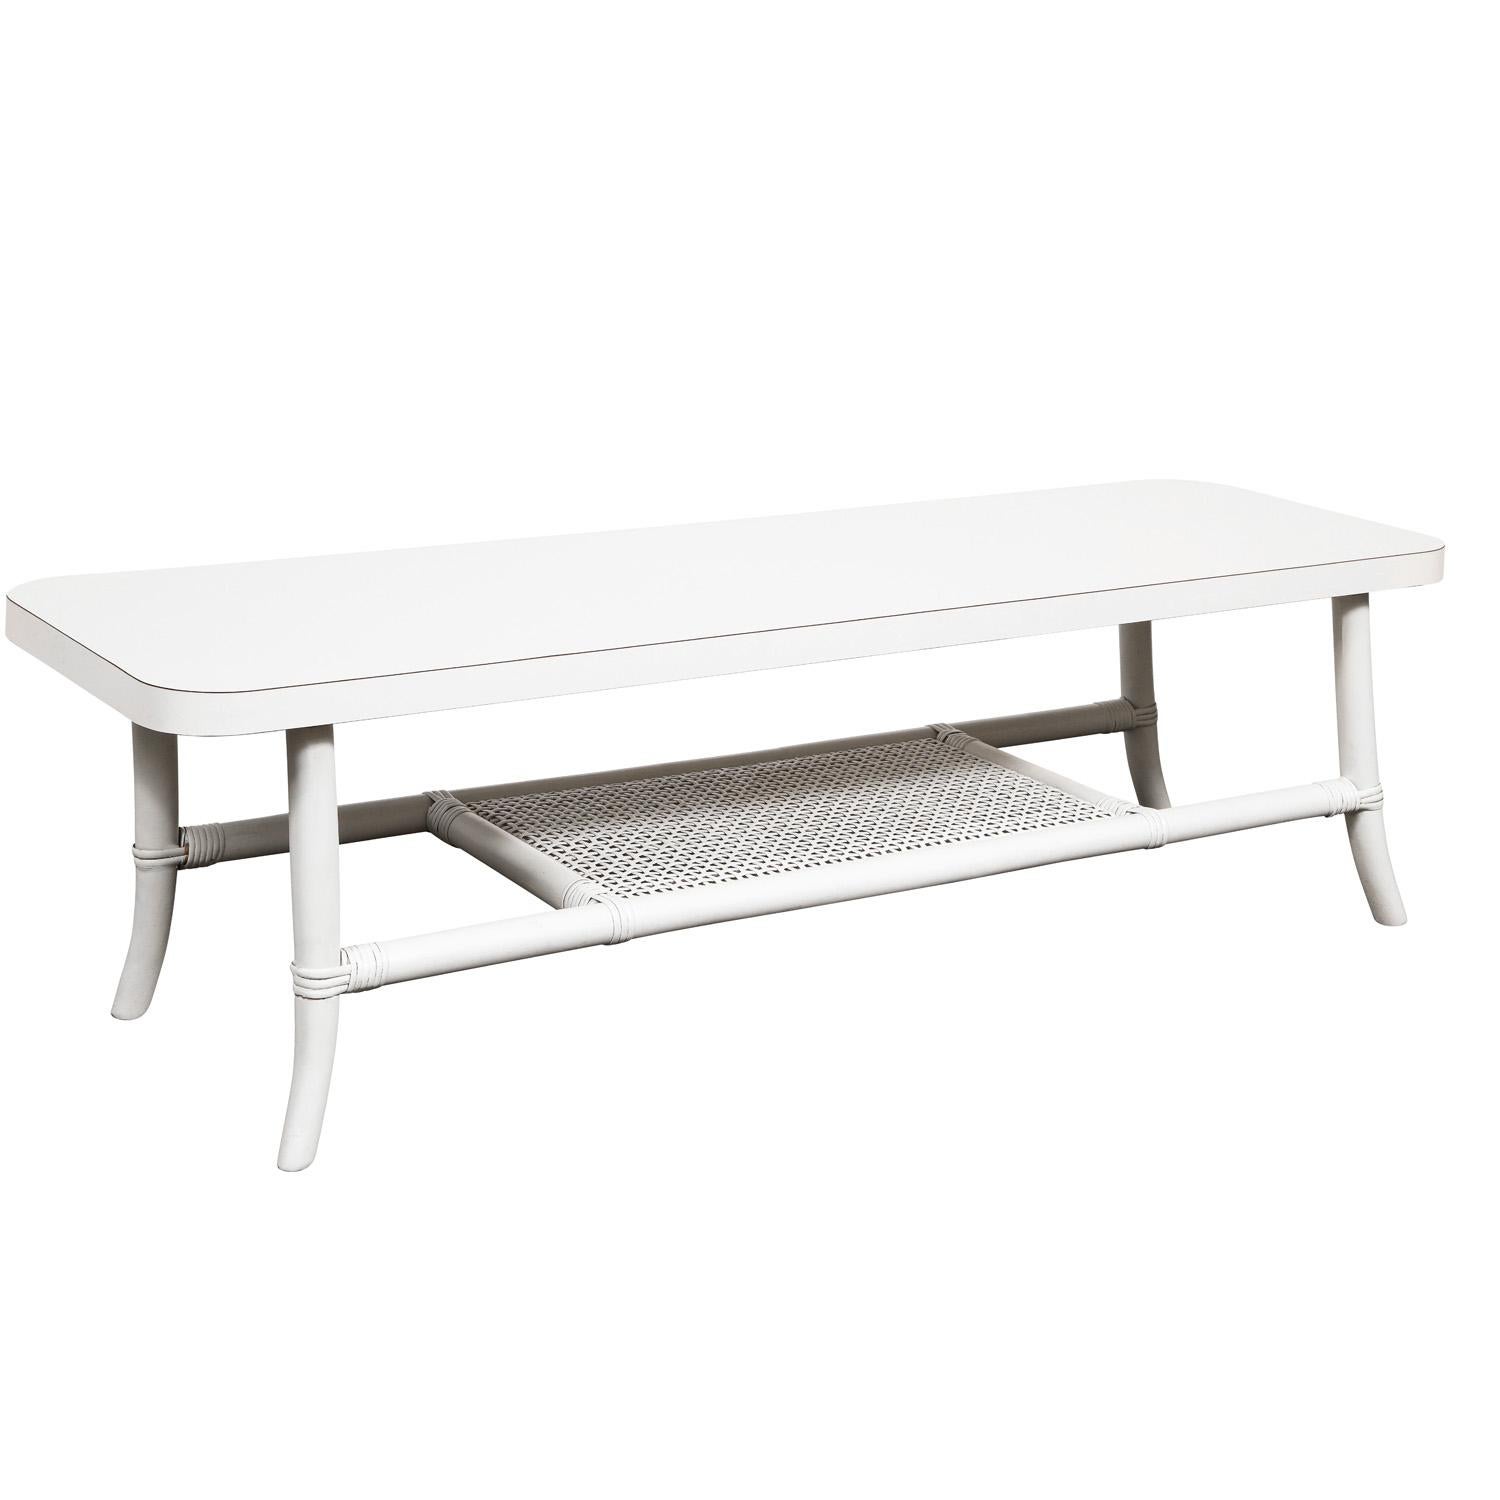 Elegant white lacquered coffee table with splaying legs, white laminate top and caned shelf by Tommi Parzinger for Willow and Reed, American 1950’s. Willow and Reed designed furniture ideal for enclosed porches or outdoor areas not exposed to the